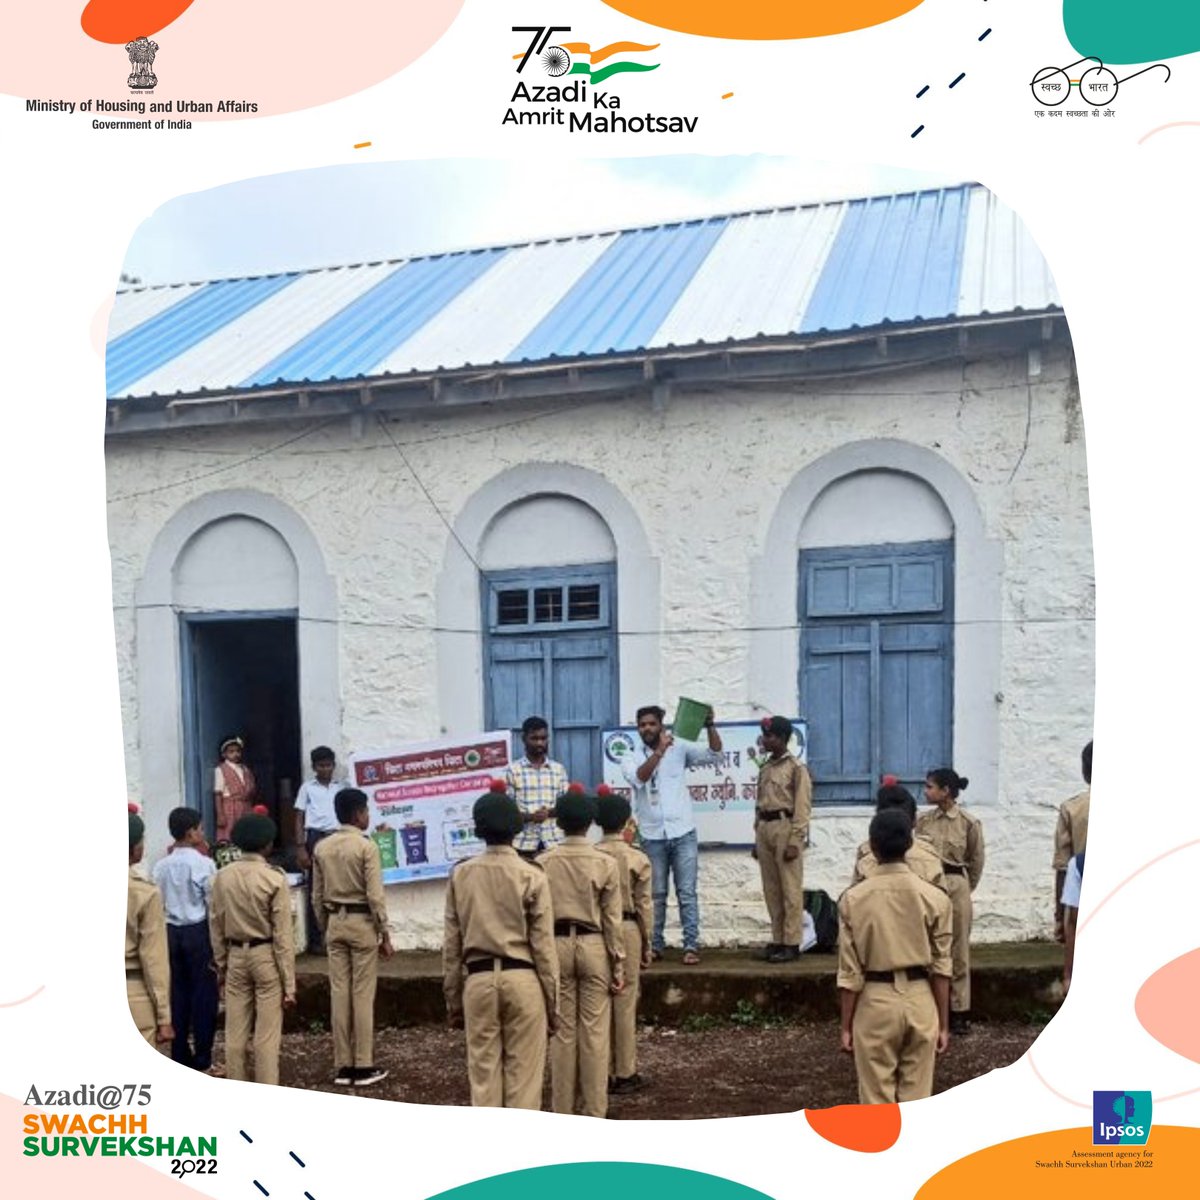 Under the ambit of the #SwachhataKeDoRang campaign, an awareness drive was conducted by the Vita Municipal Council in Maharashtra for NCC Cadets on the importance of source segregation of waste. #SwachhSurvekshan2022